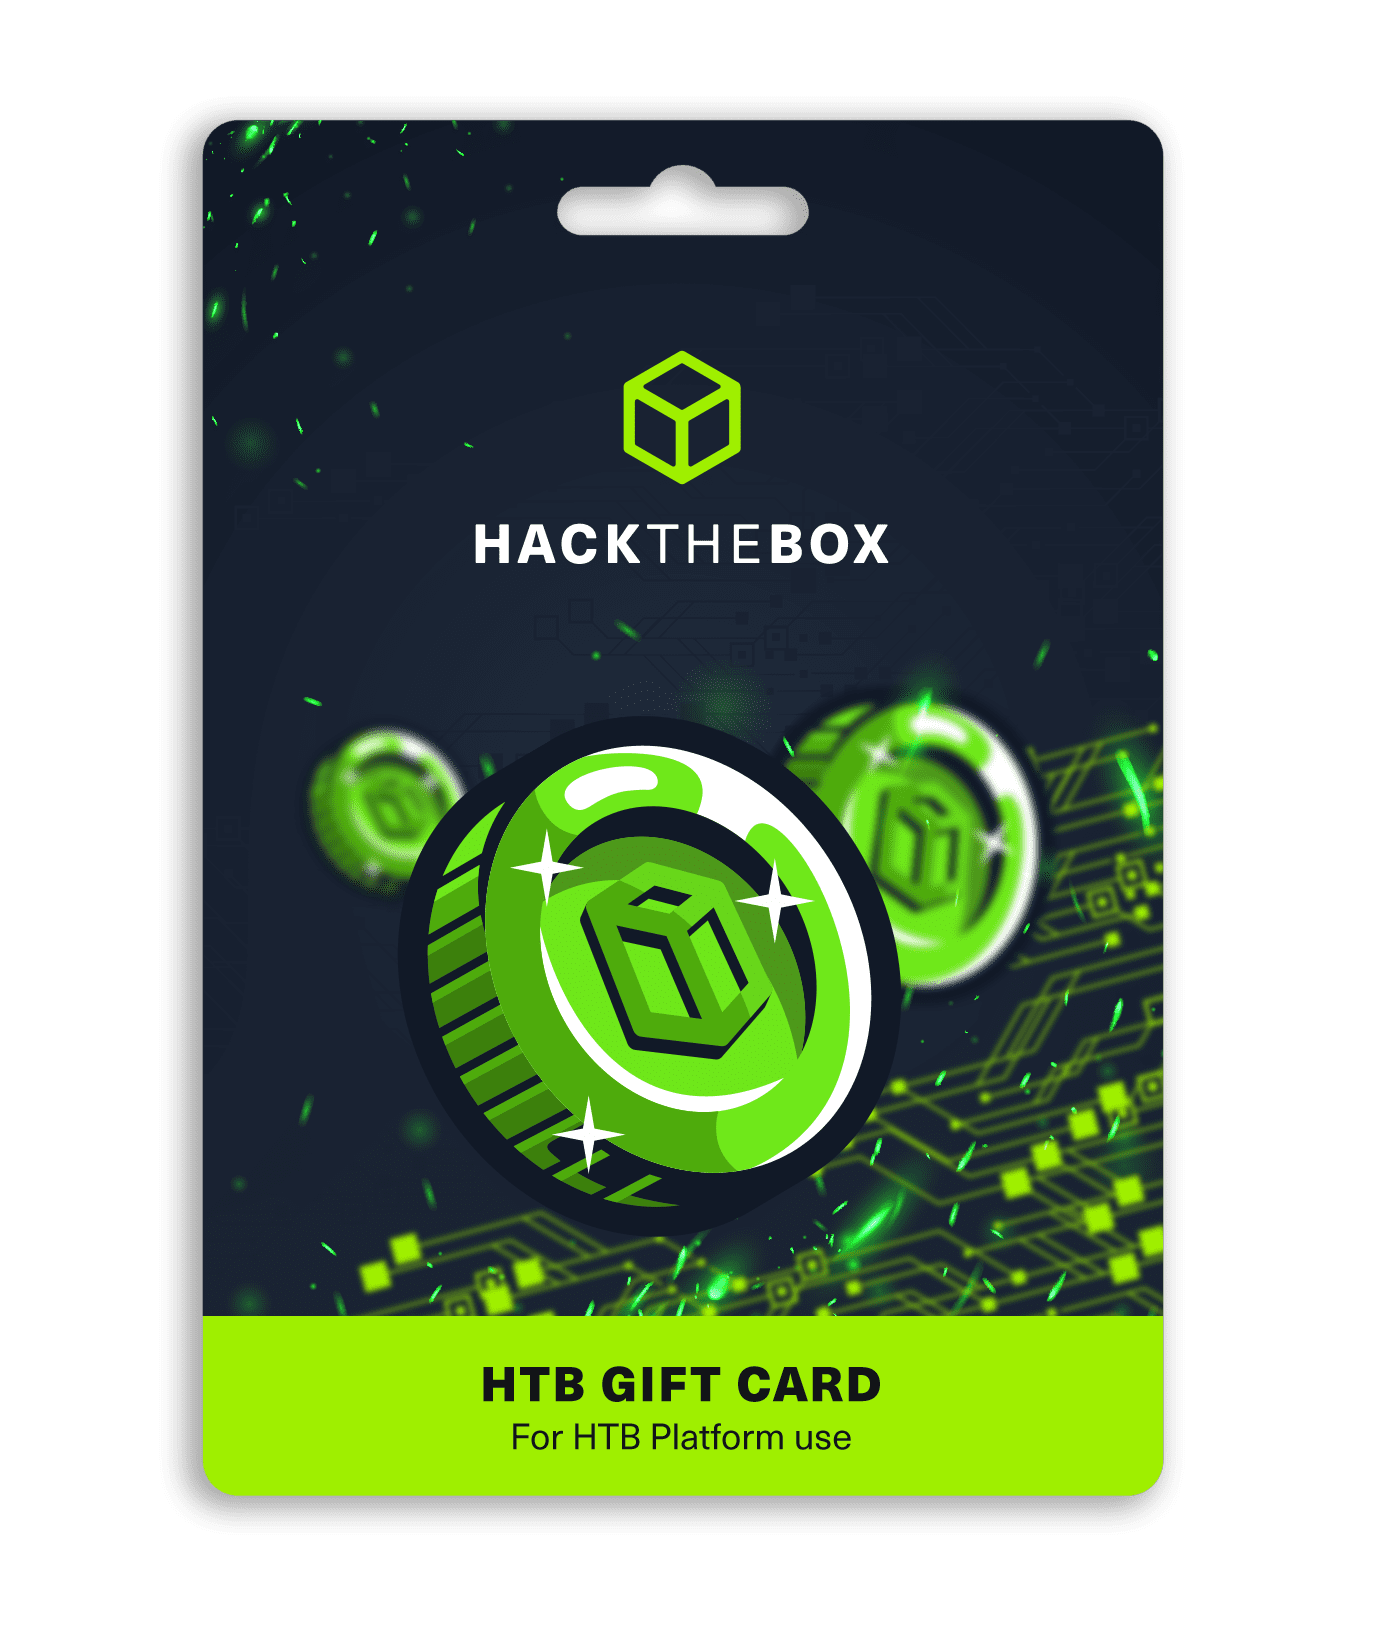 Hack The Box Gift Cards: Give a cybersecurity training gift to your friends